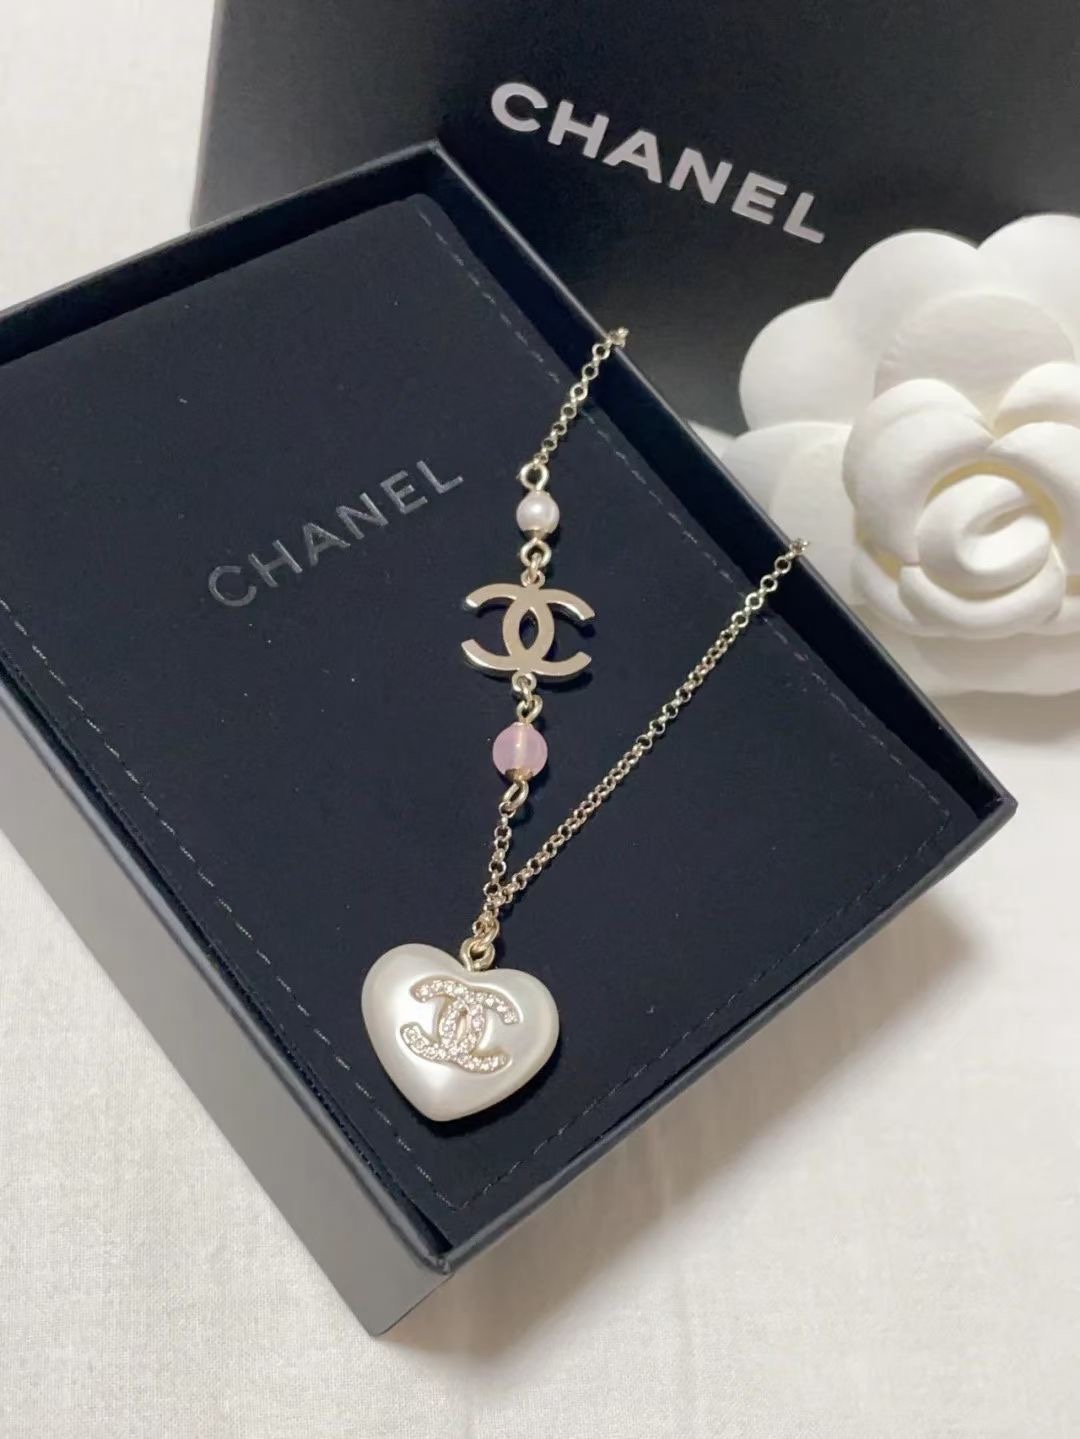 B028 Chanel necklace 107049